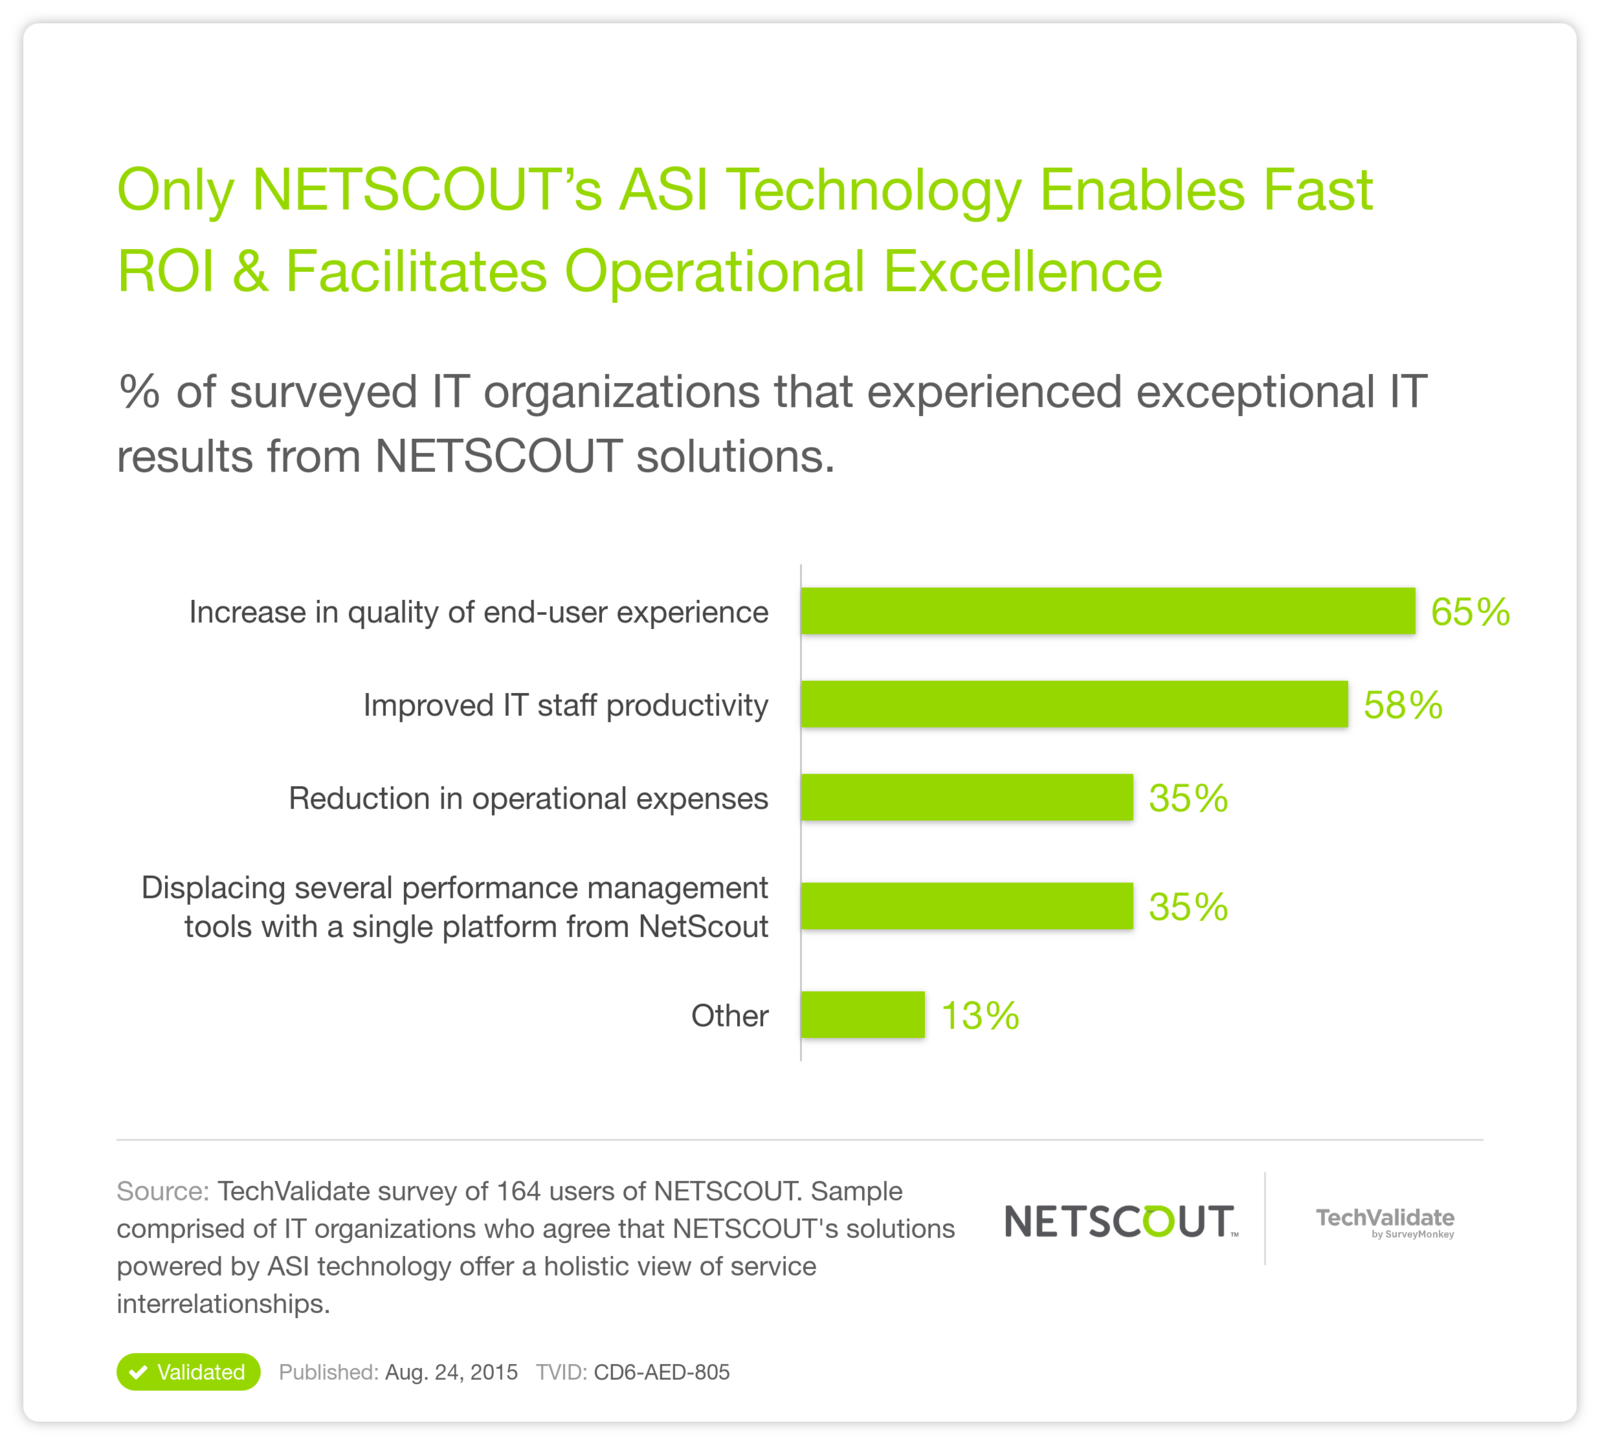 Only NETSCOUT's ASI Technology Enables Fast ROI & Facilitates Operational Excellence